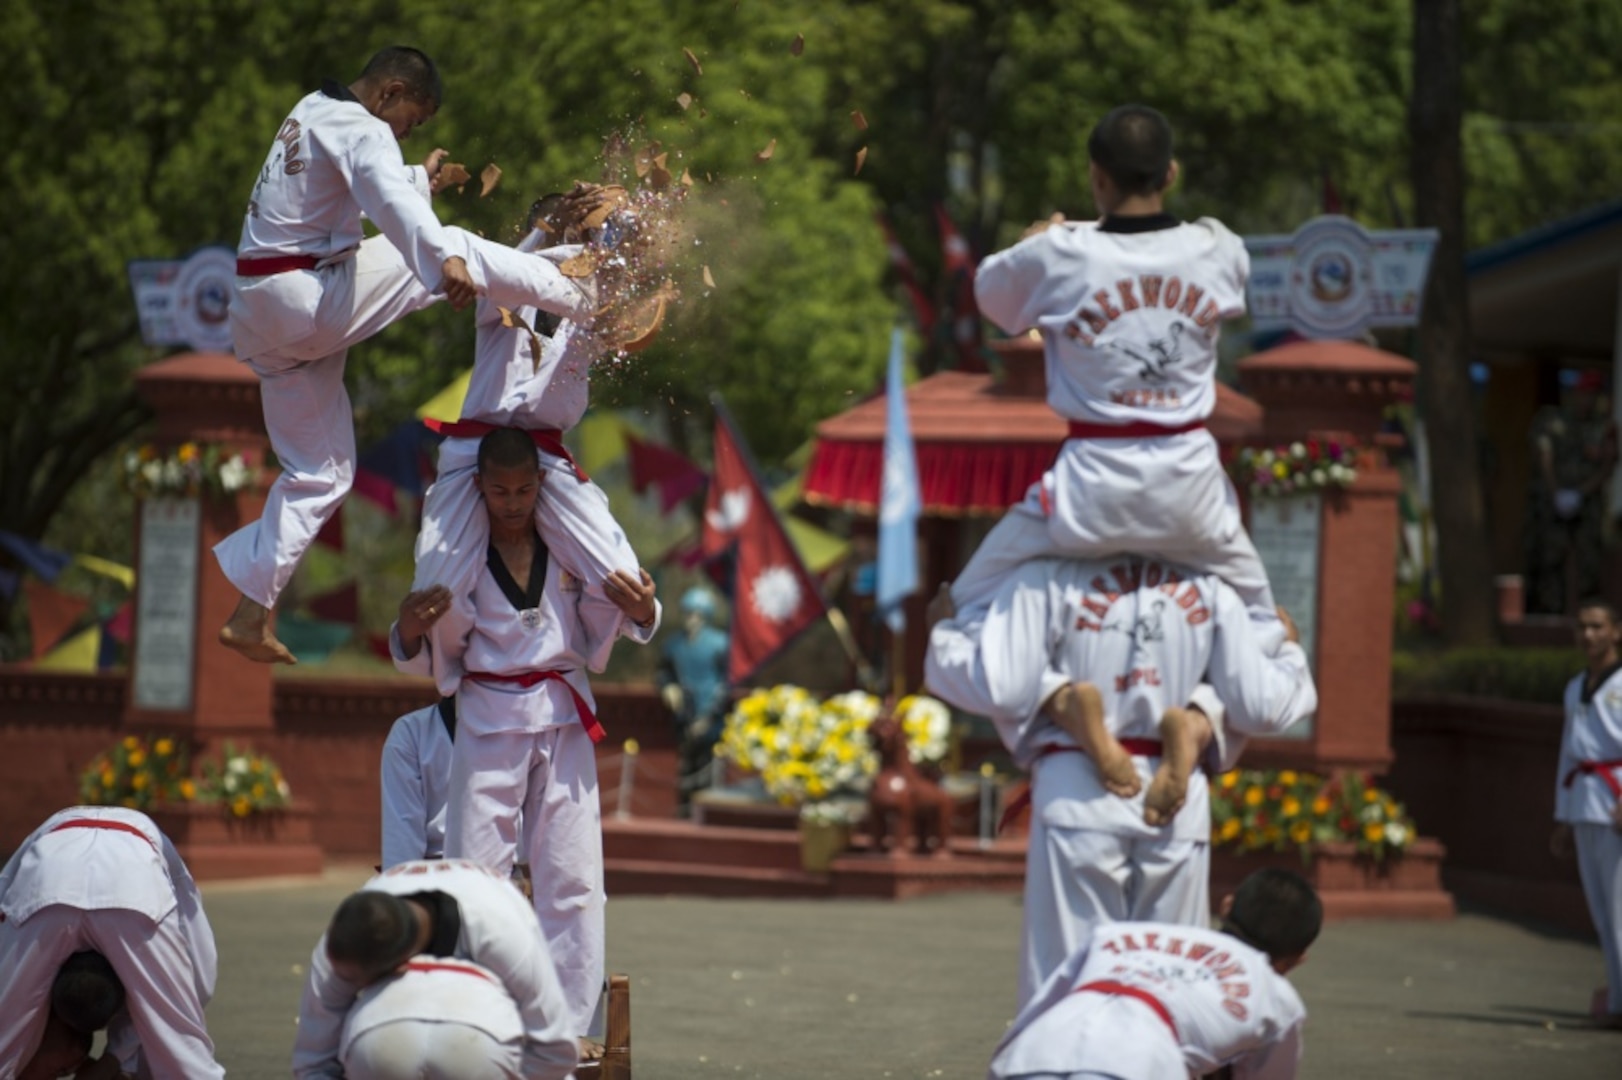 Nepalese soldiers perform a martial arts demonstration in the closing ceremony during exercise Shanti Prayas III in Nepal, April 3, 2017. Shanti Prayas is a multinational United Nations peacekeeping exercise designed to provide pre-deployment training to U.N. partner countries in preparation for real-world peacekeeping operations.